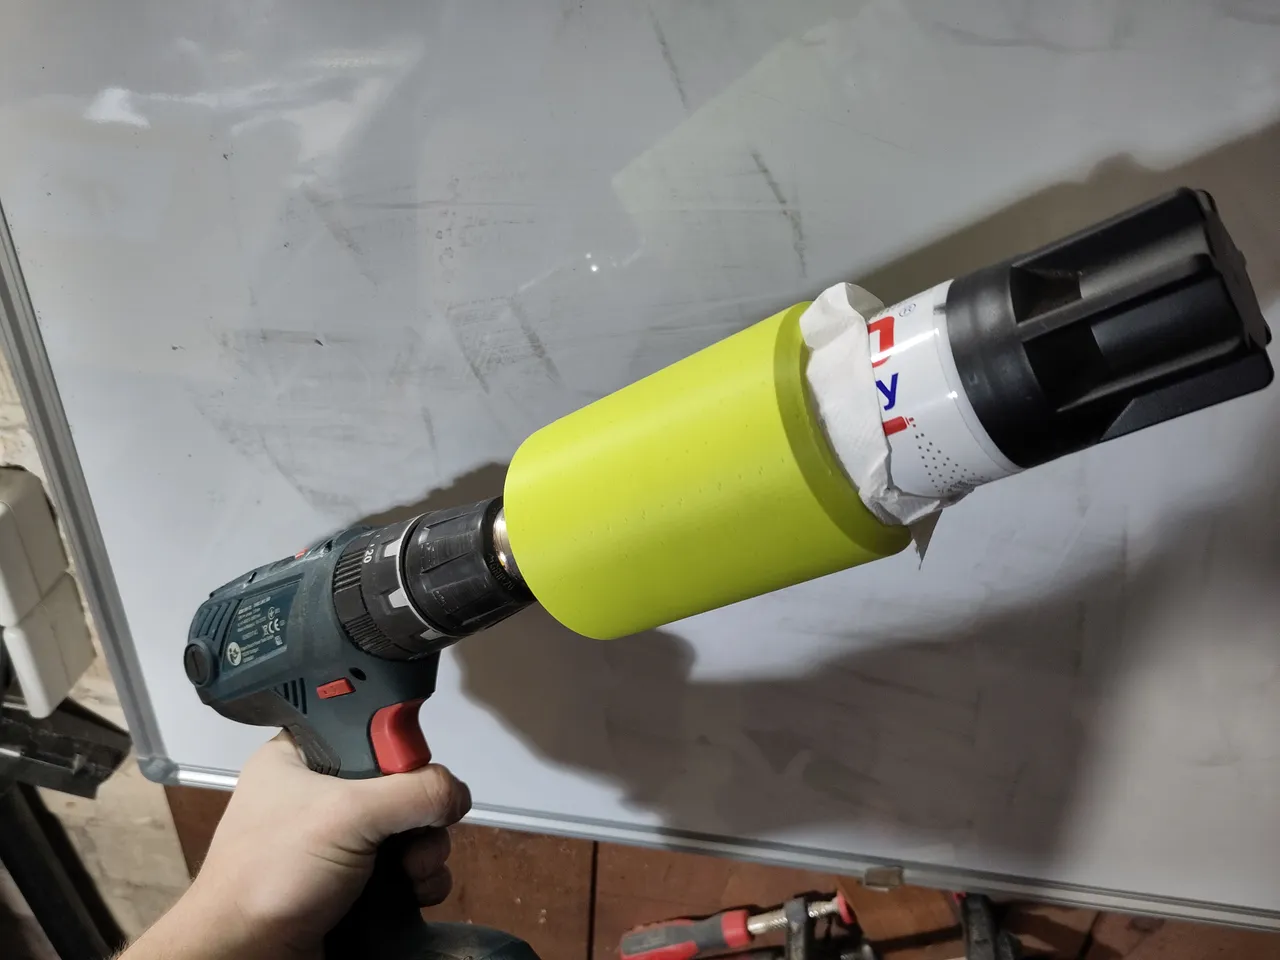 Eccentric paint spray can shaker/mixer for your drill by Marvin